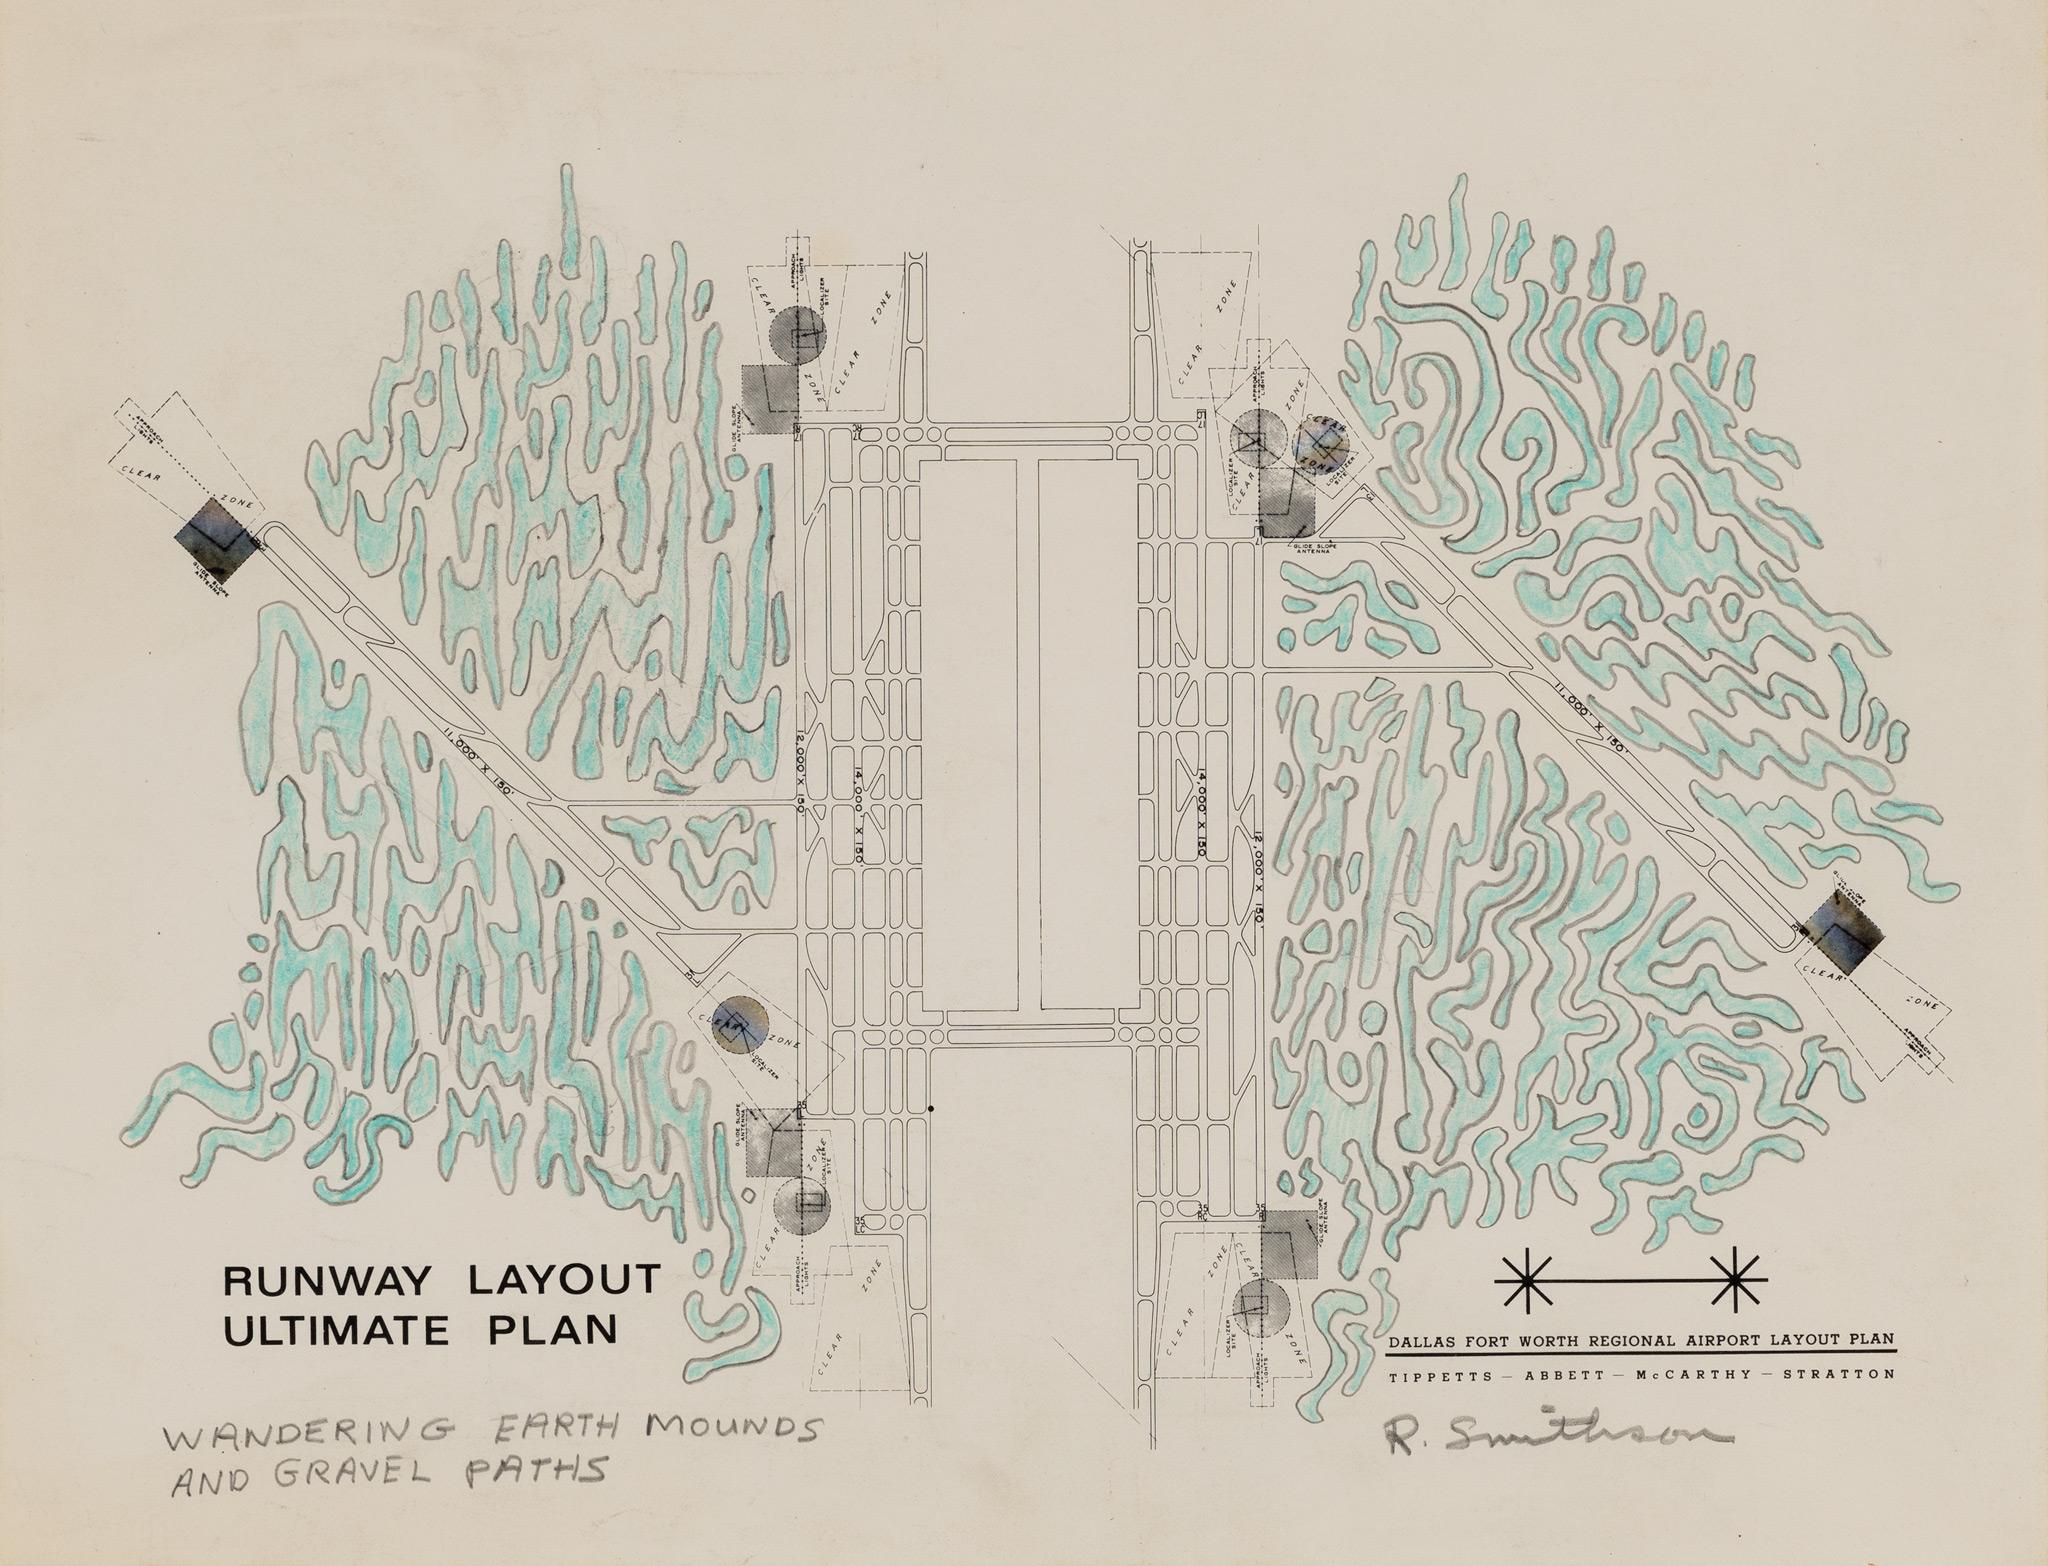 graphite and color pencil drawing of aerial view of airport with wandering earth mounds drawn in teal